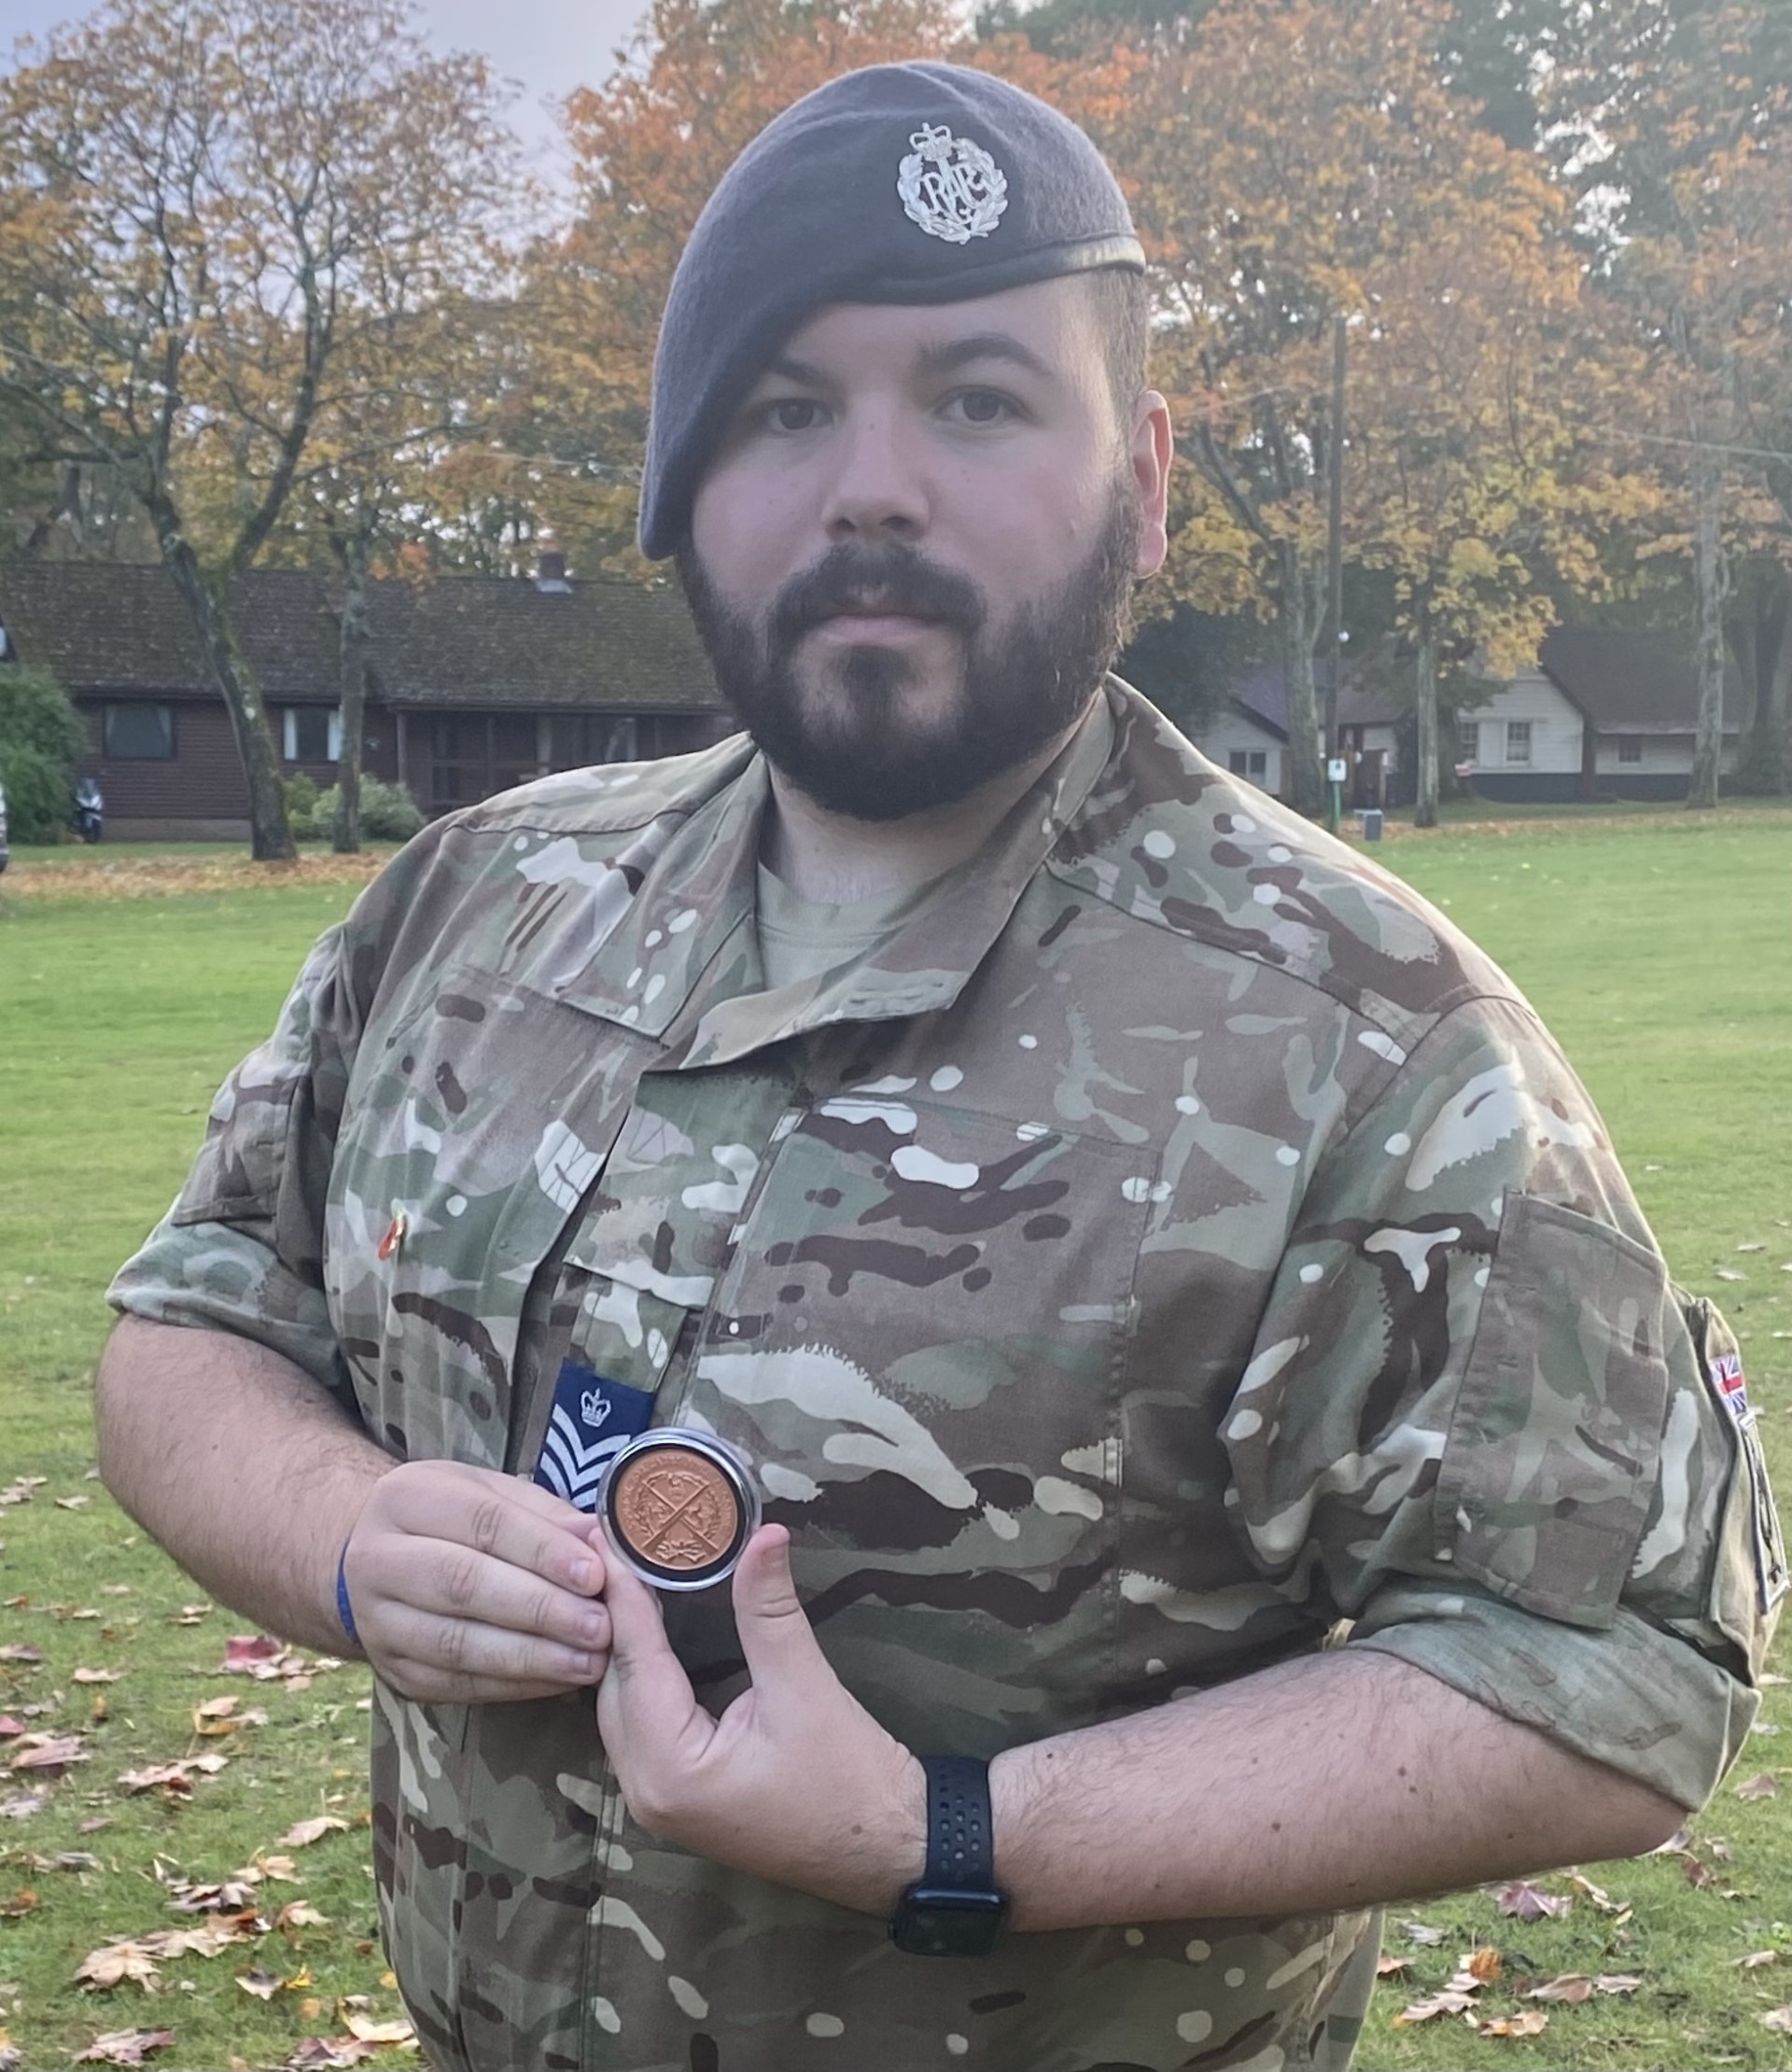 Flight Sergeant Birch with the CCRS Challenge Coin